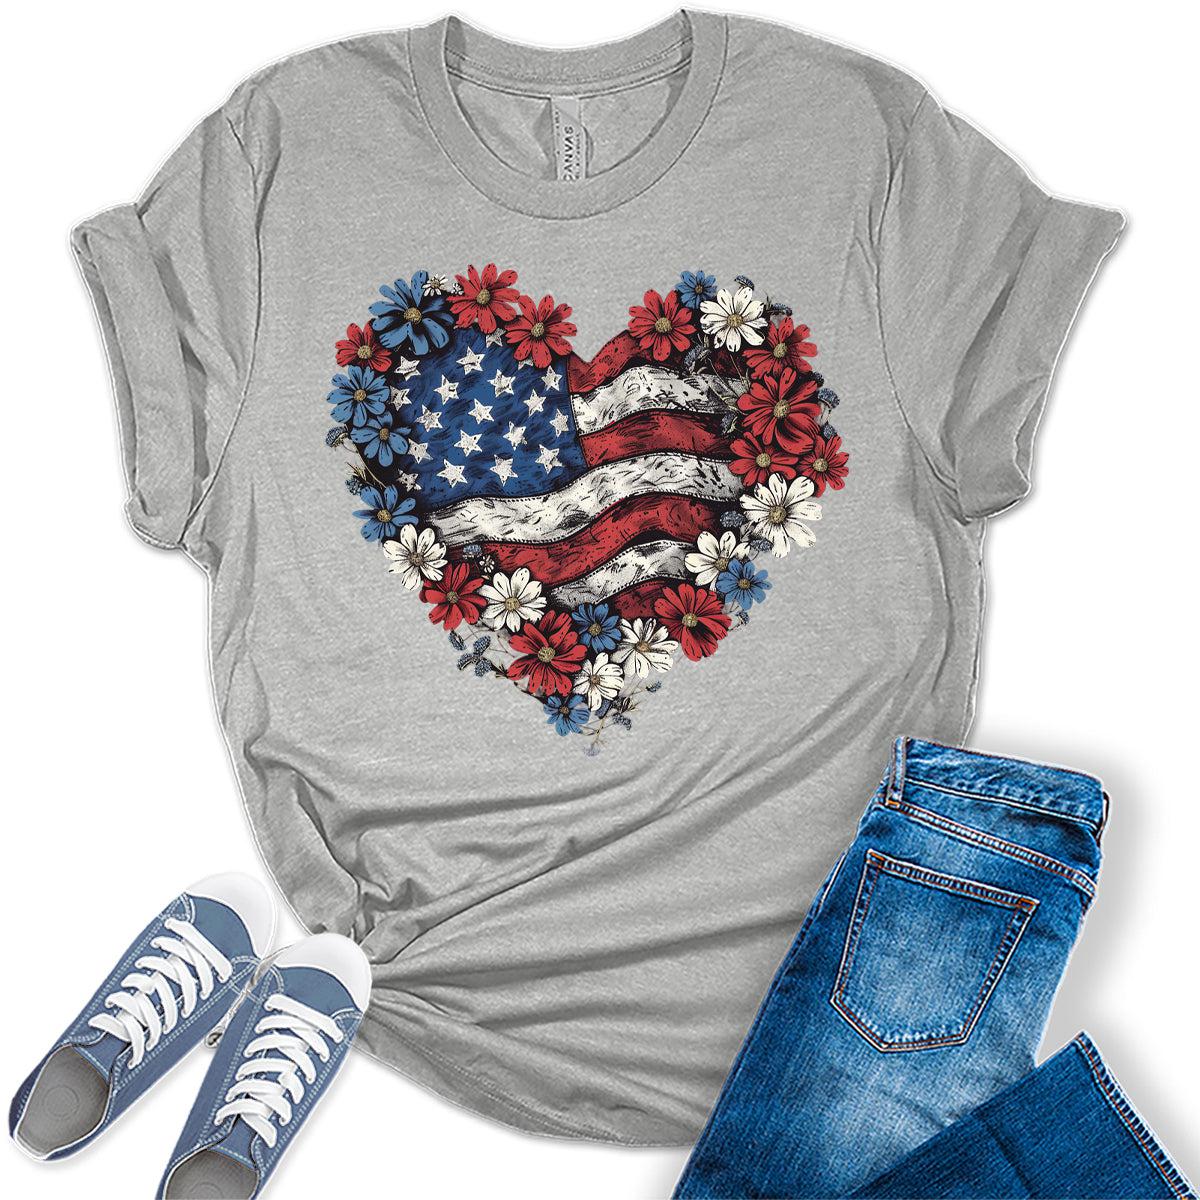 Womens 4th of July Graphic Tees